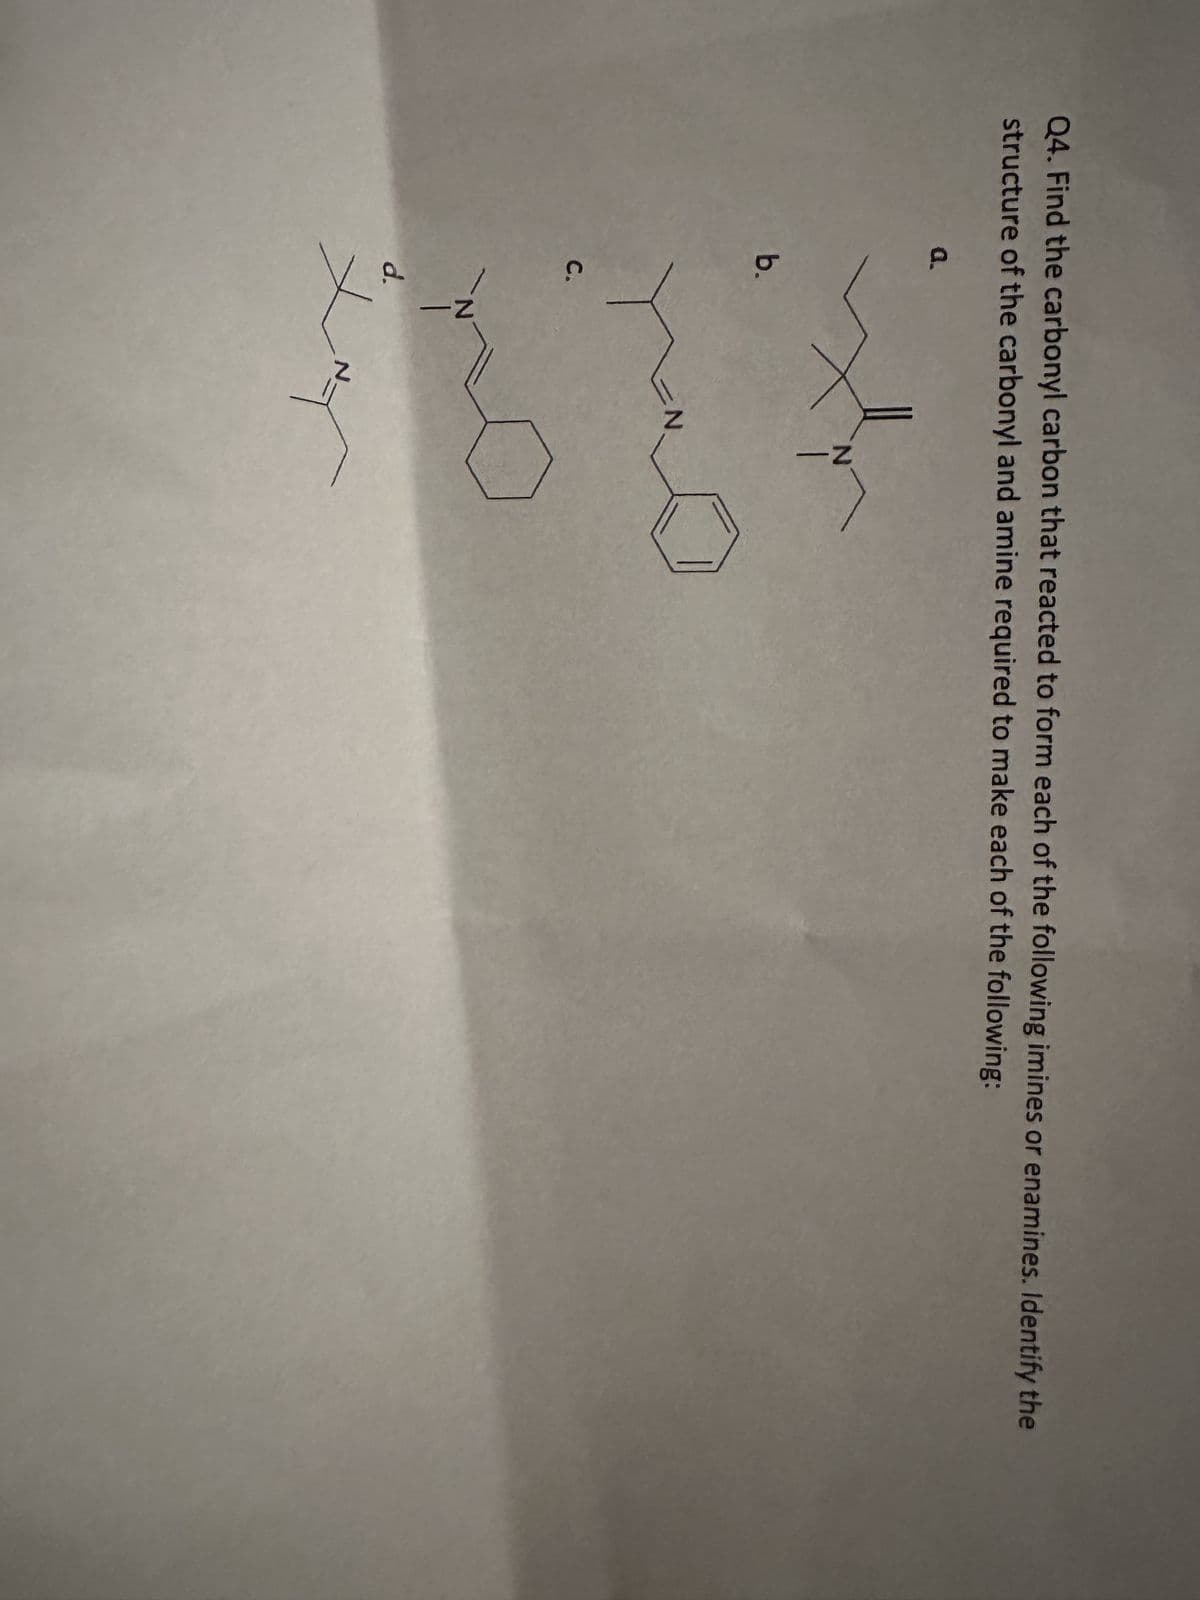 Q4. Find the carbonyl carbon that reacted to form each of the following imines or enamines. Identify the
structure of the carbonyl and amine required to make each of the following:
b.
C.
d.
N
N
no
Z
N